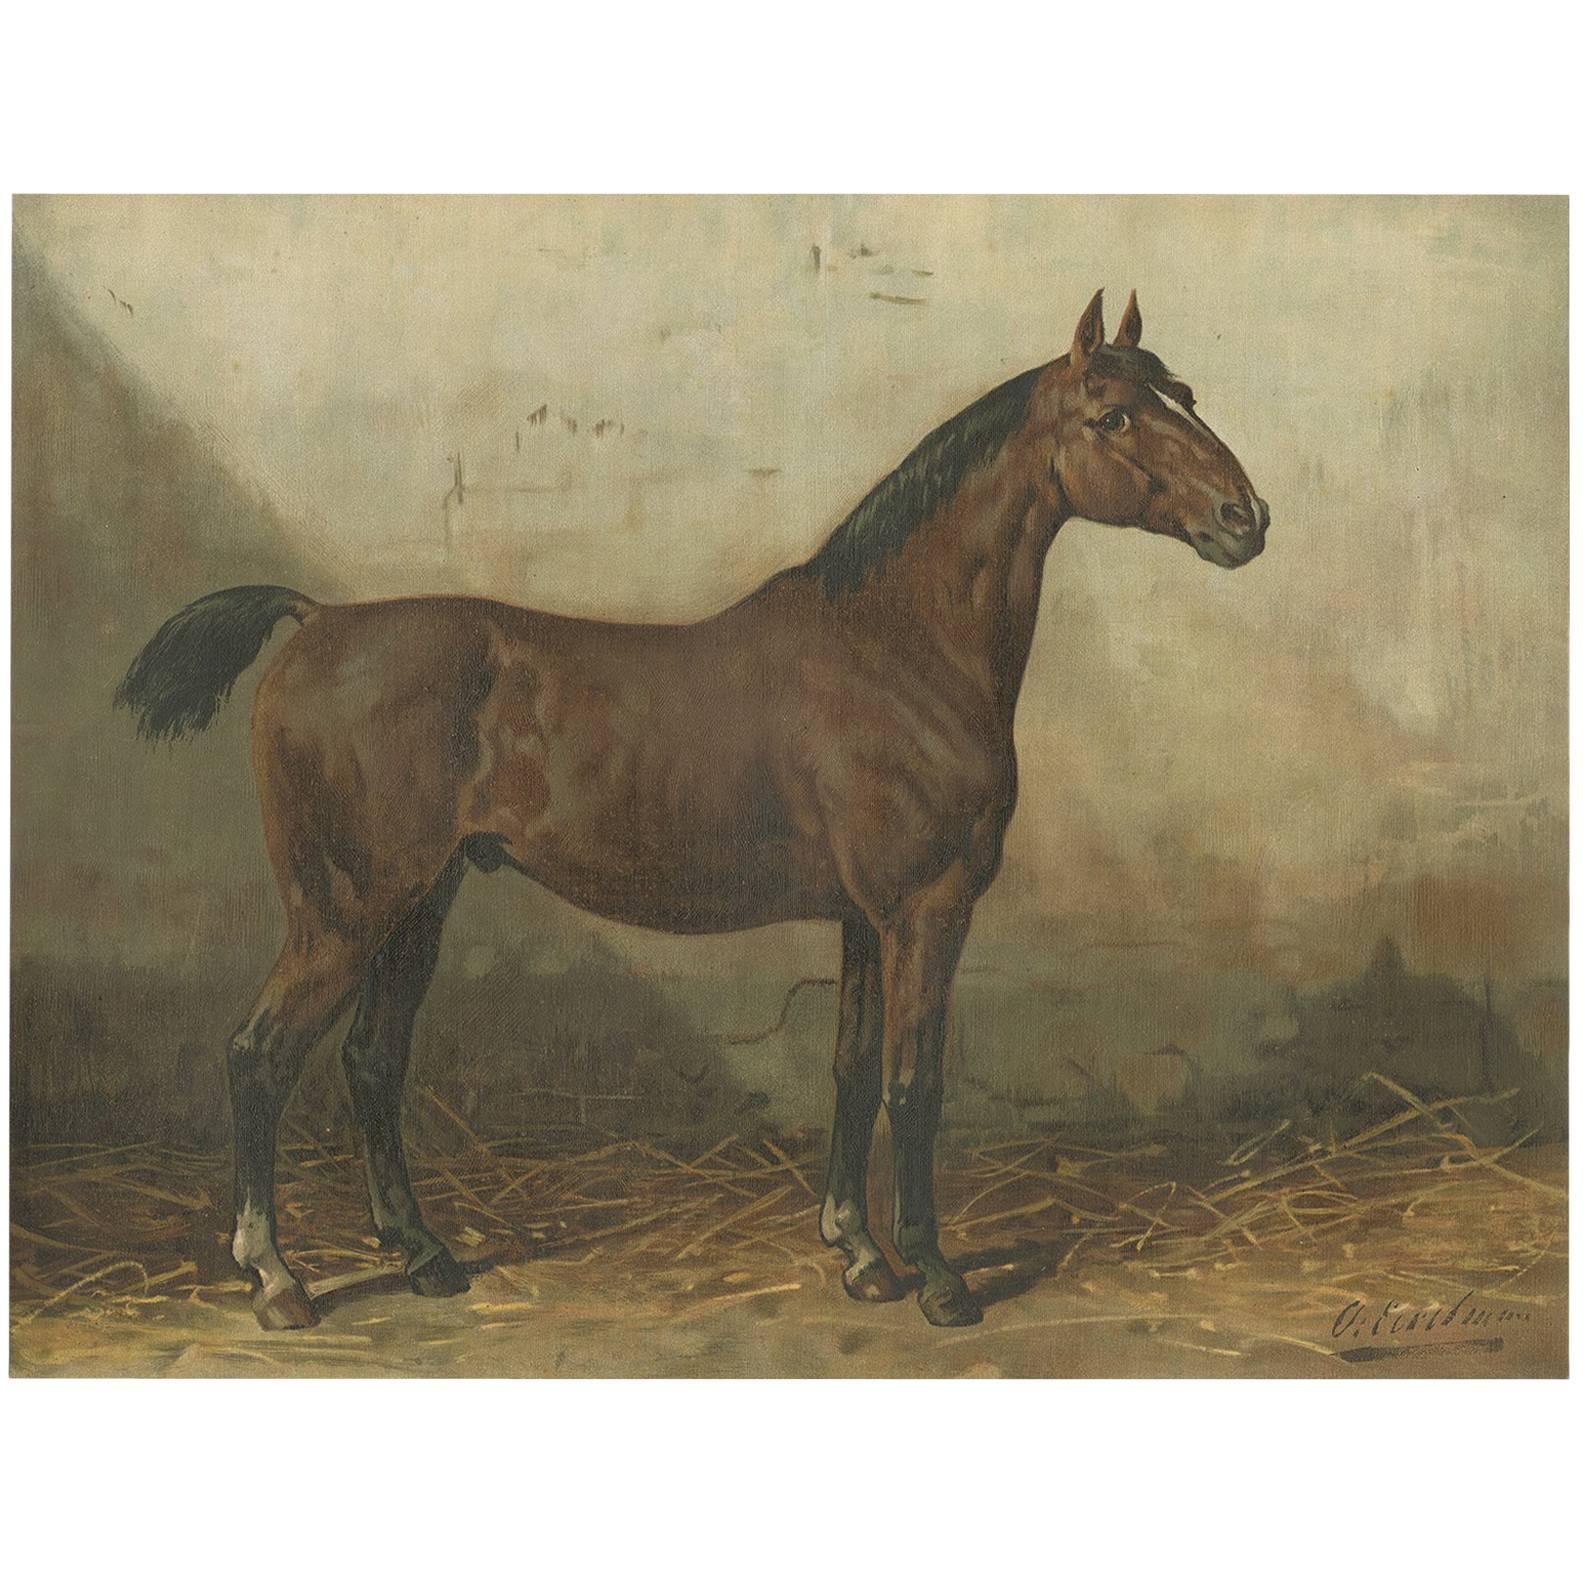 Antique Print of the Holsteiner Horse by O. Eerelman, 1898